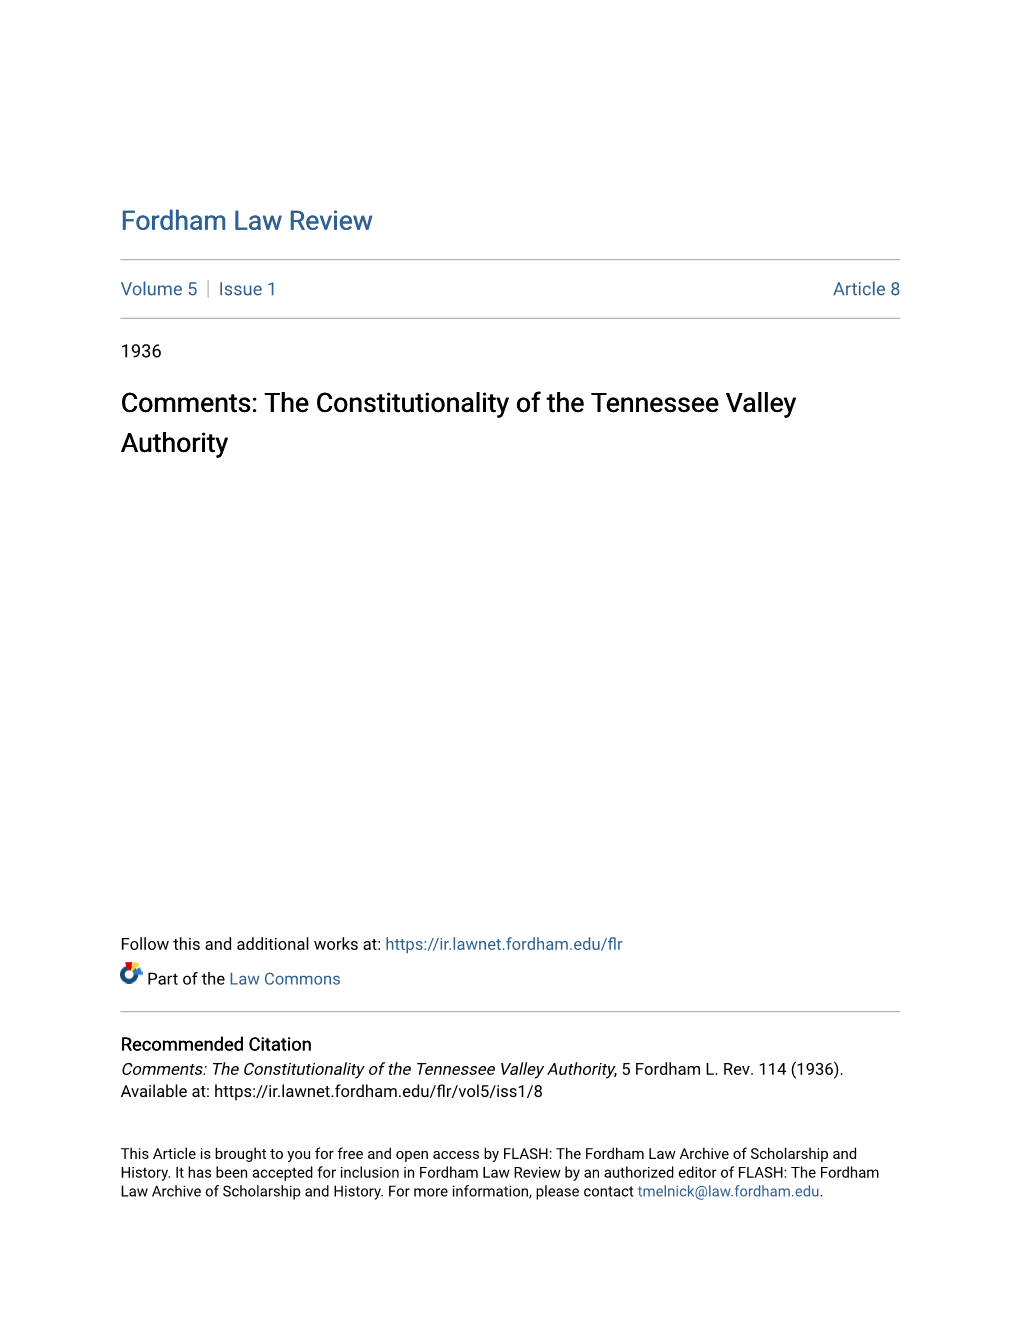 The Constitutionality of the Tennessee Valley Authority